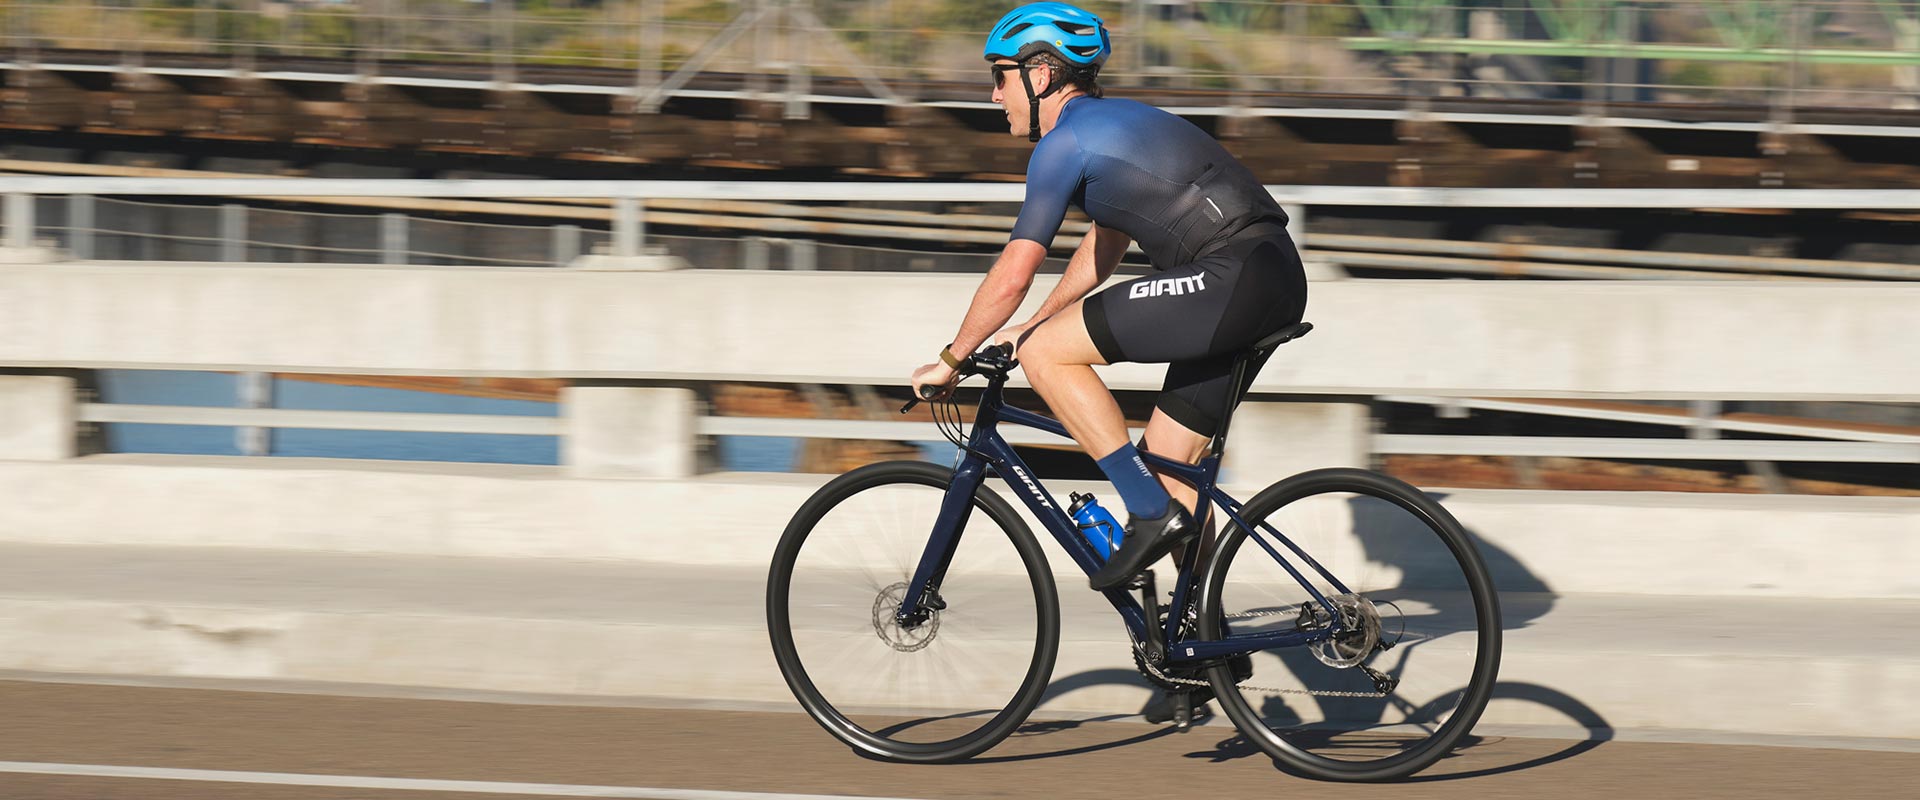 FastRoad SL | Giant Bicycles Official site